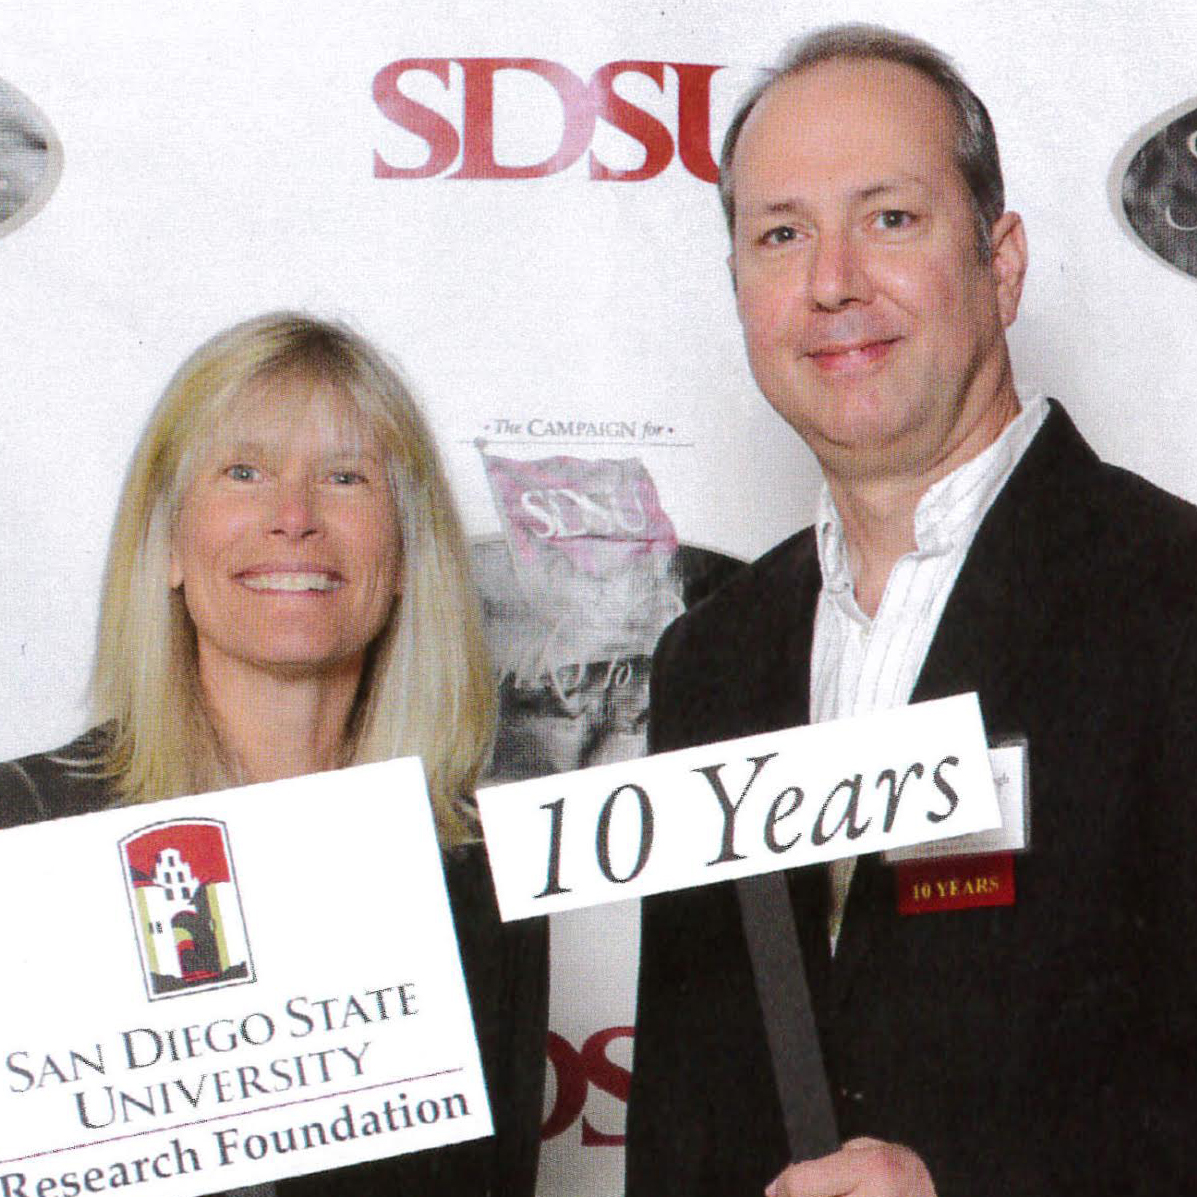 Researchers honored for 10 years of service to SDSU!